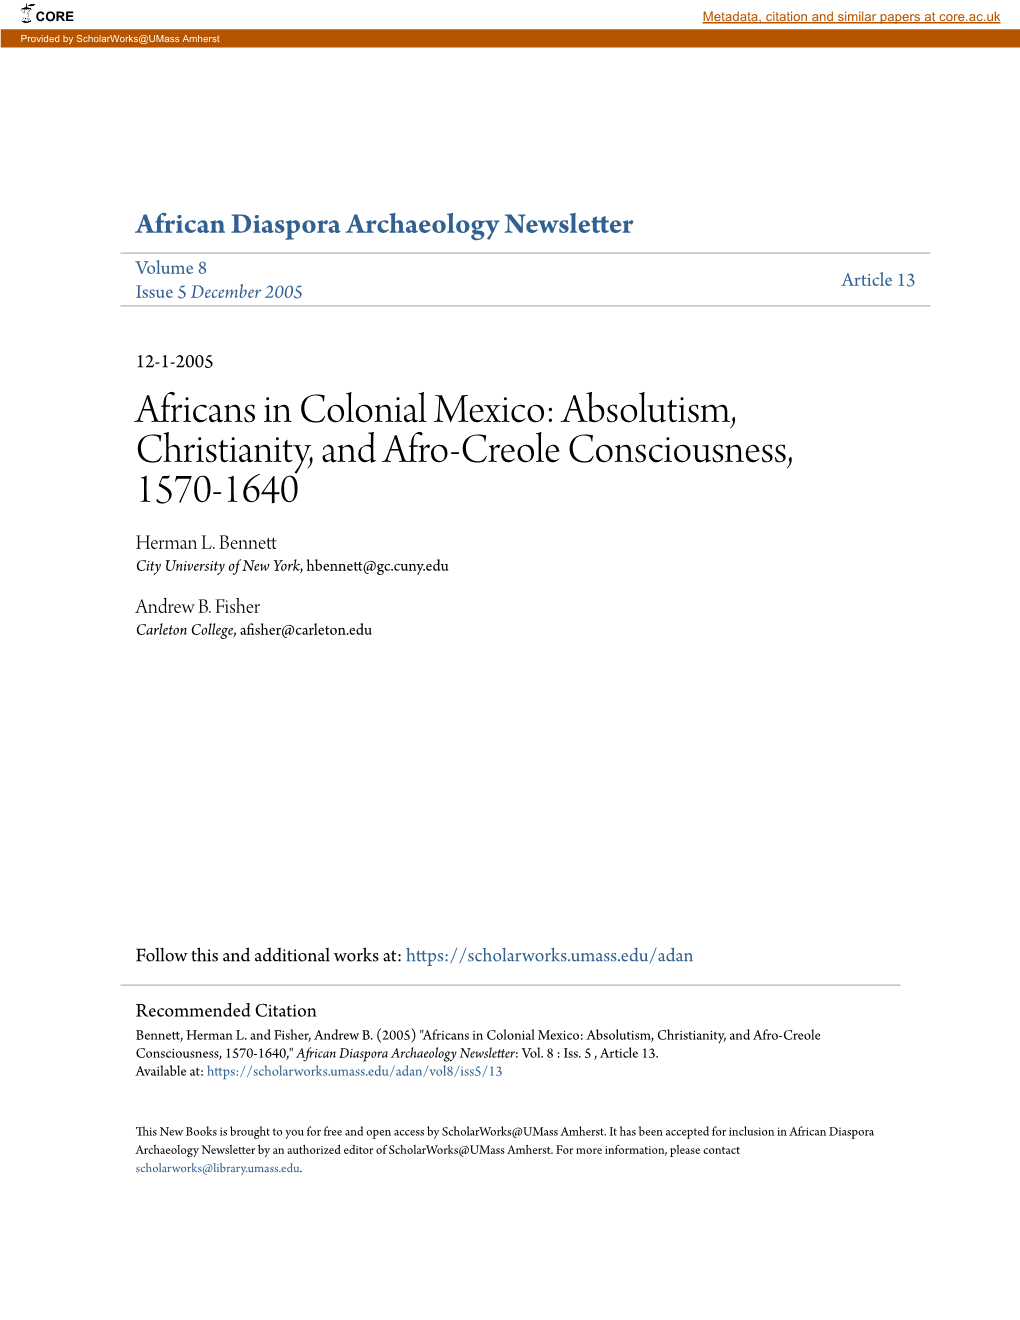 Africans in Colonial Mexico: Absolutism, Christianity, and Afro-Creole Consciousness, 1570-1640 Herman L